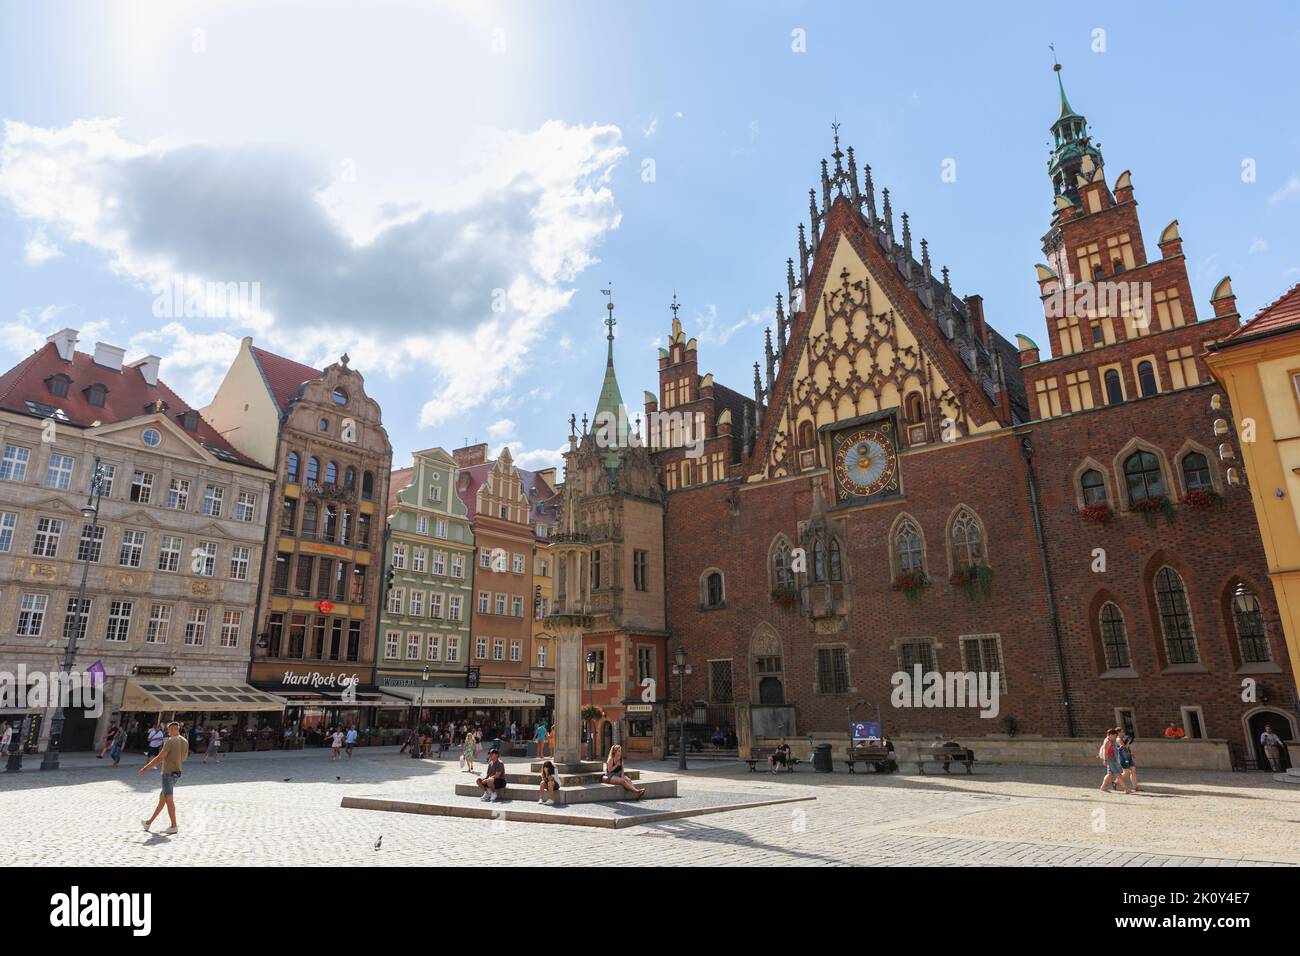 Street view of Old Town, Central Market Square and Old Town Hall in Wroclaw, Poland. Stock Photo